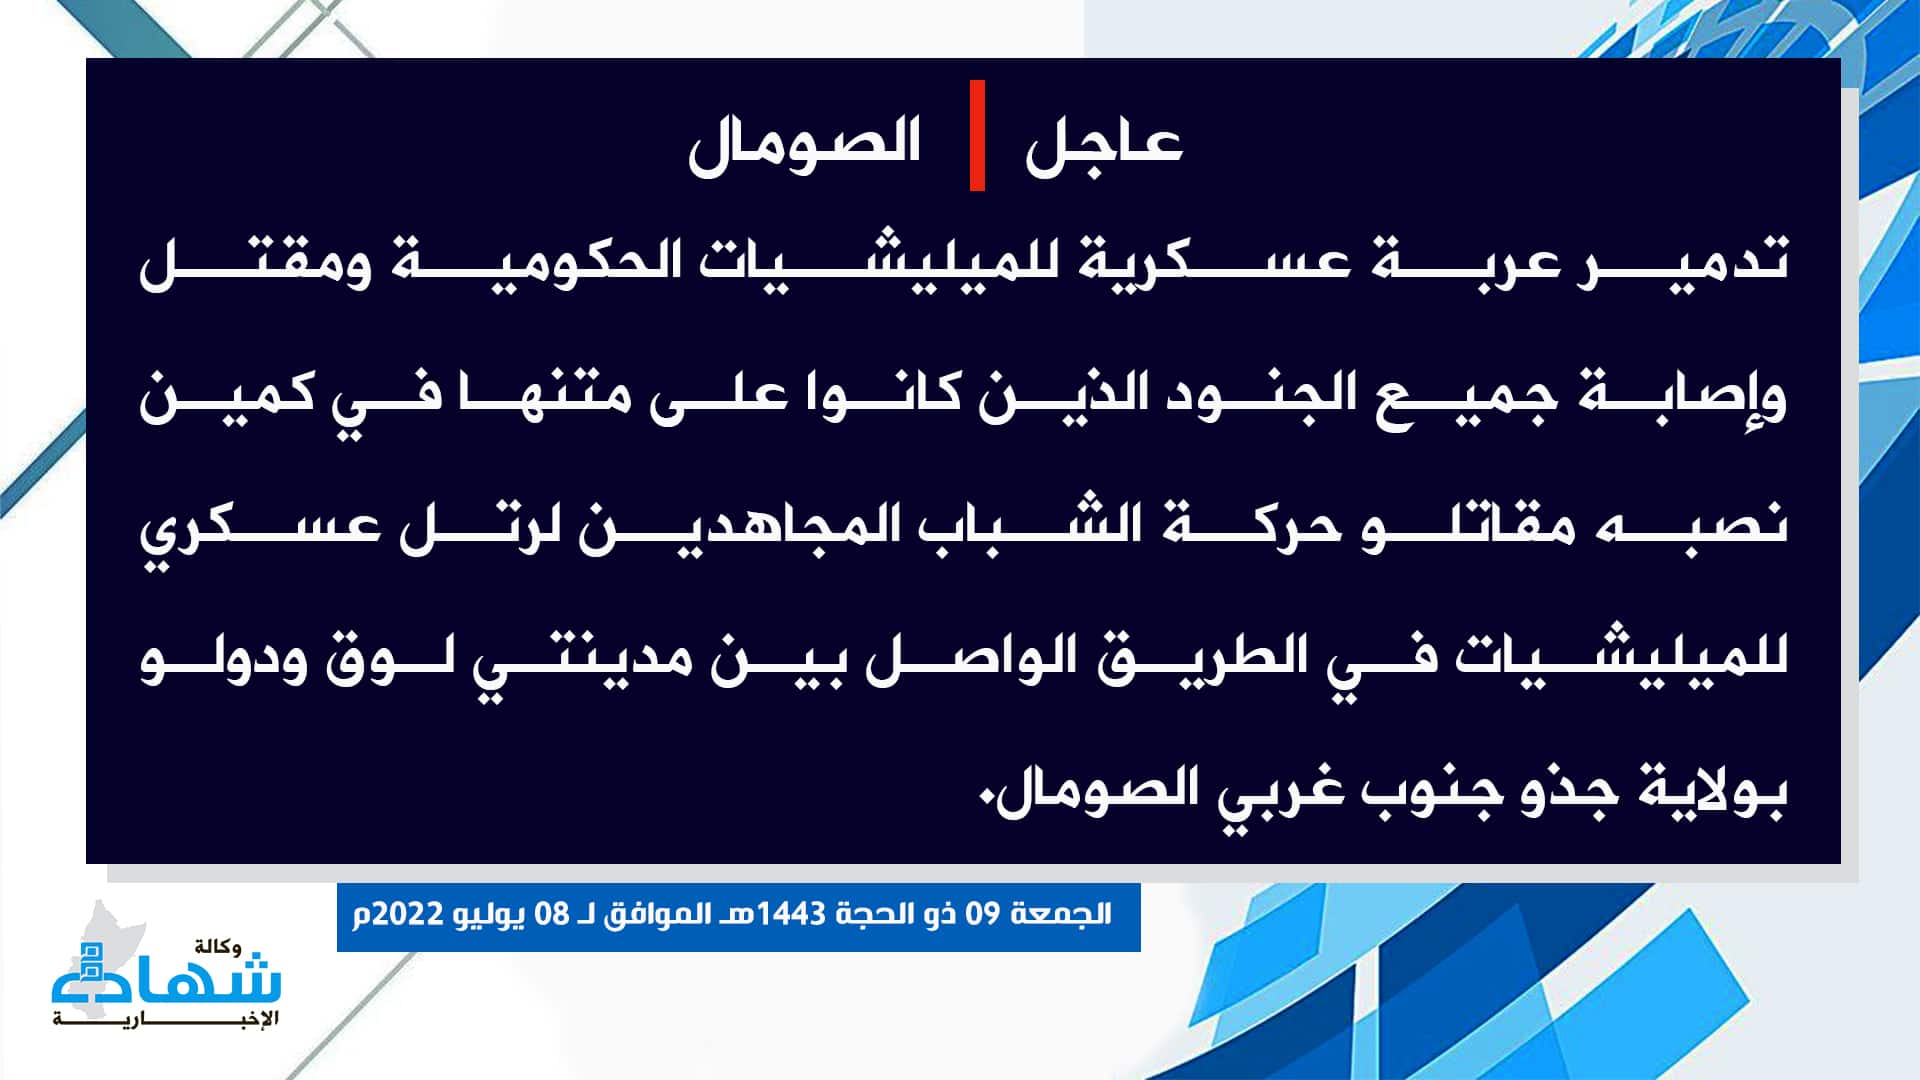 (Claim) al-Shabaab: A Somalian Forces Vehicle Was Destroyed and Those on Board Were Killed and Injured in an Ambush on Their Convoy on the Road Between Louq and Dolo Cities, Gedo State, Southwestern Somalia - 8 July 2022